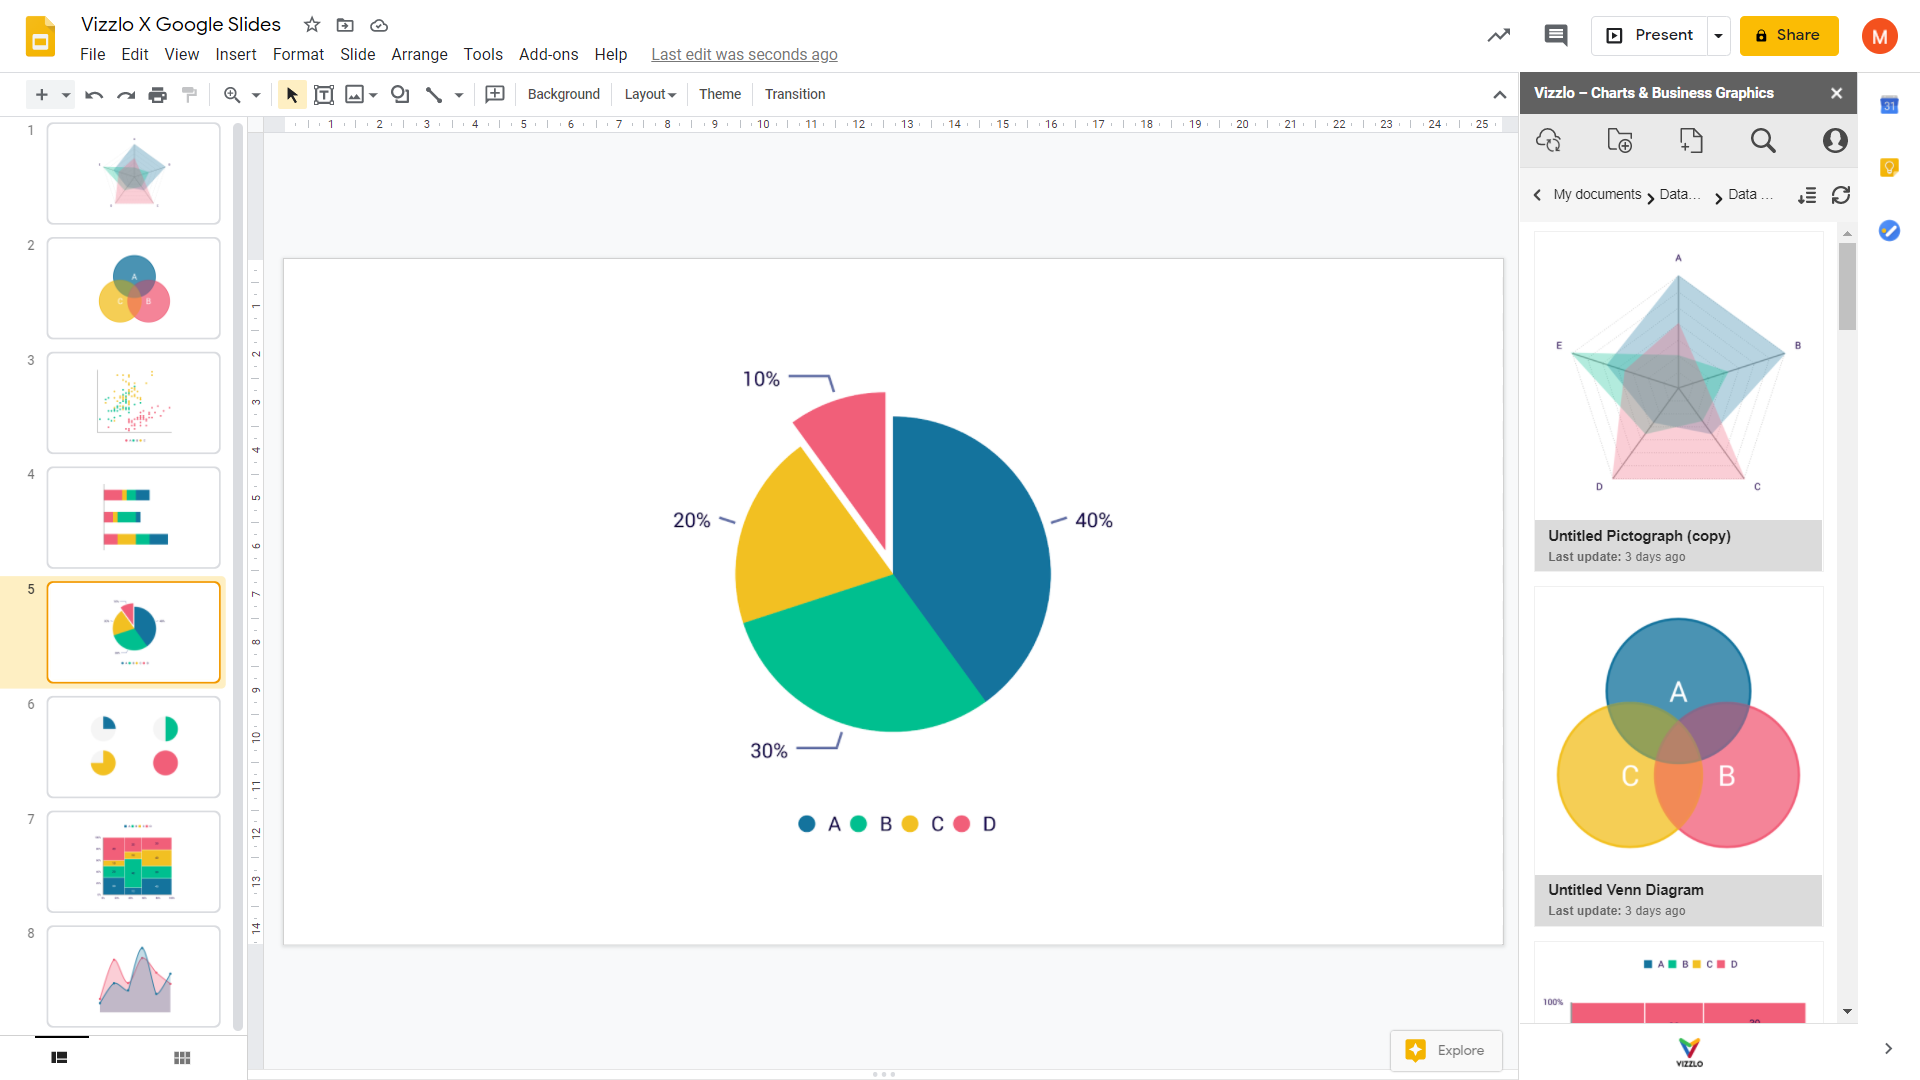 Learn more about our PowerPoint pie chart maker